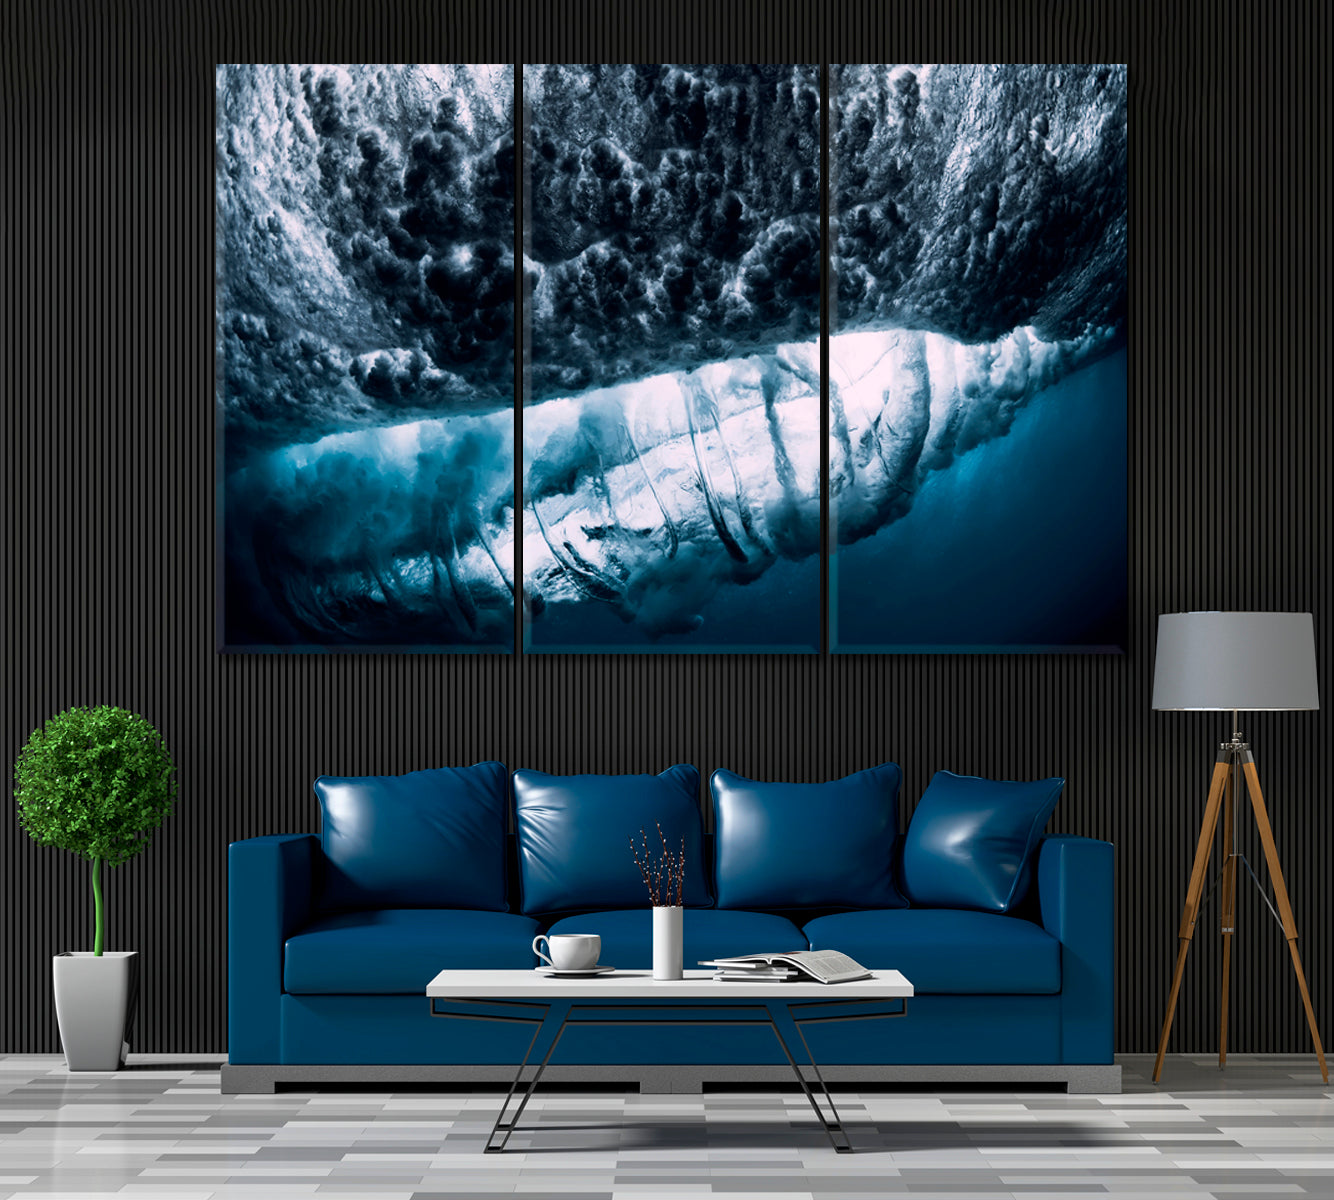 Ocean Wave Underwater with Air Bubbles Canvas Print ArtLexy 3 Panels 36"x24" inches 